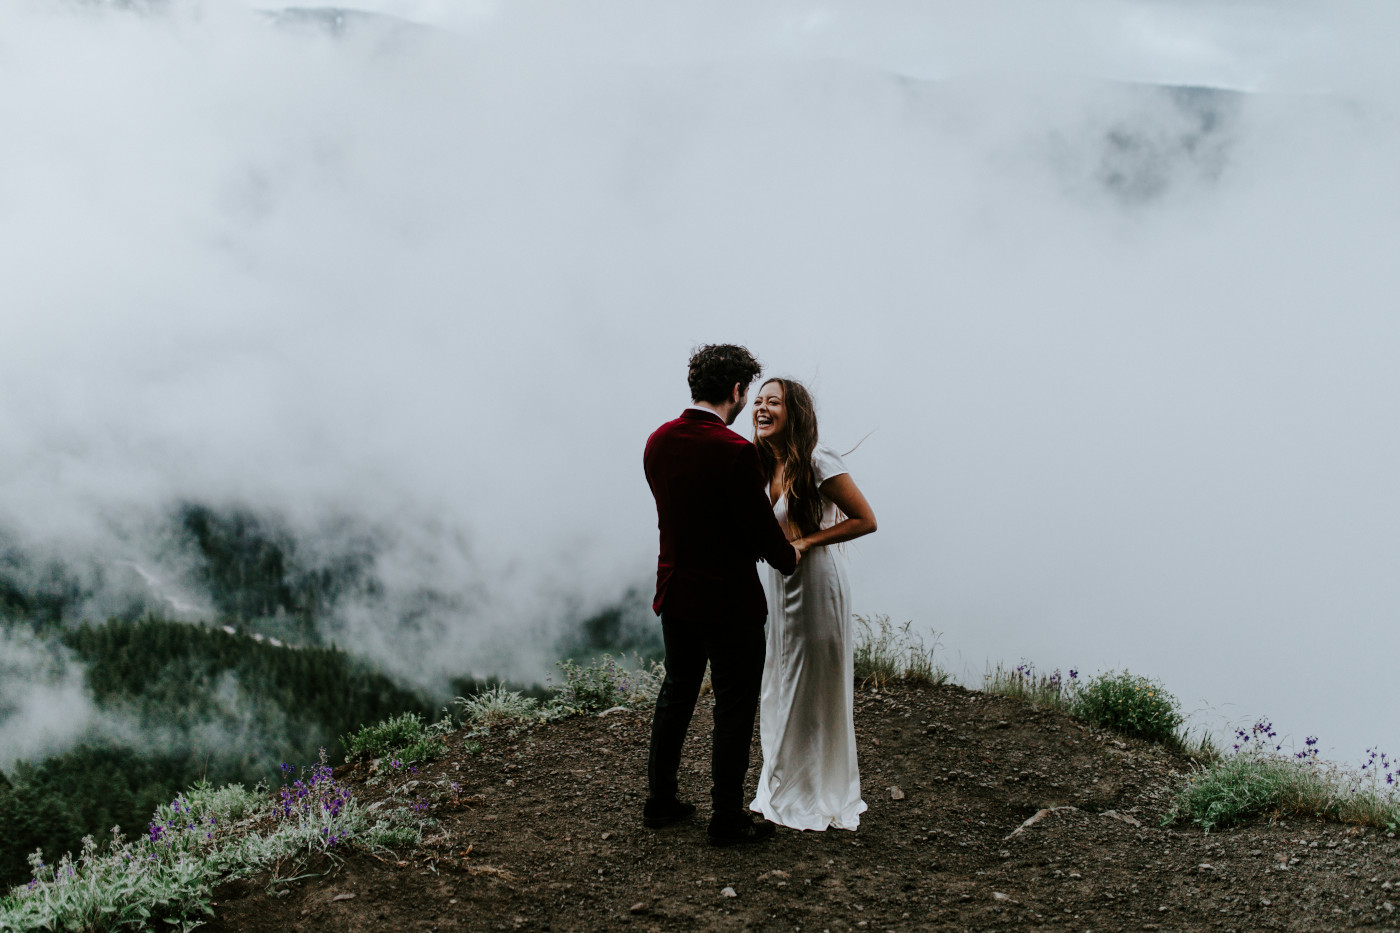 Katelyn and Murray share a moment at Mount Hood. Elopement wedding photography at Mount Hood by Sienna Plus Josh.